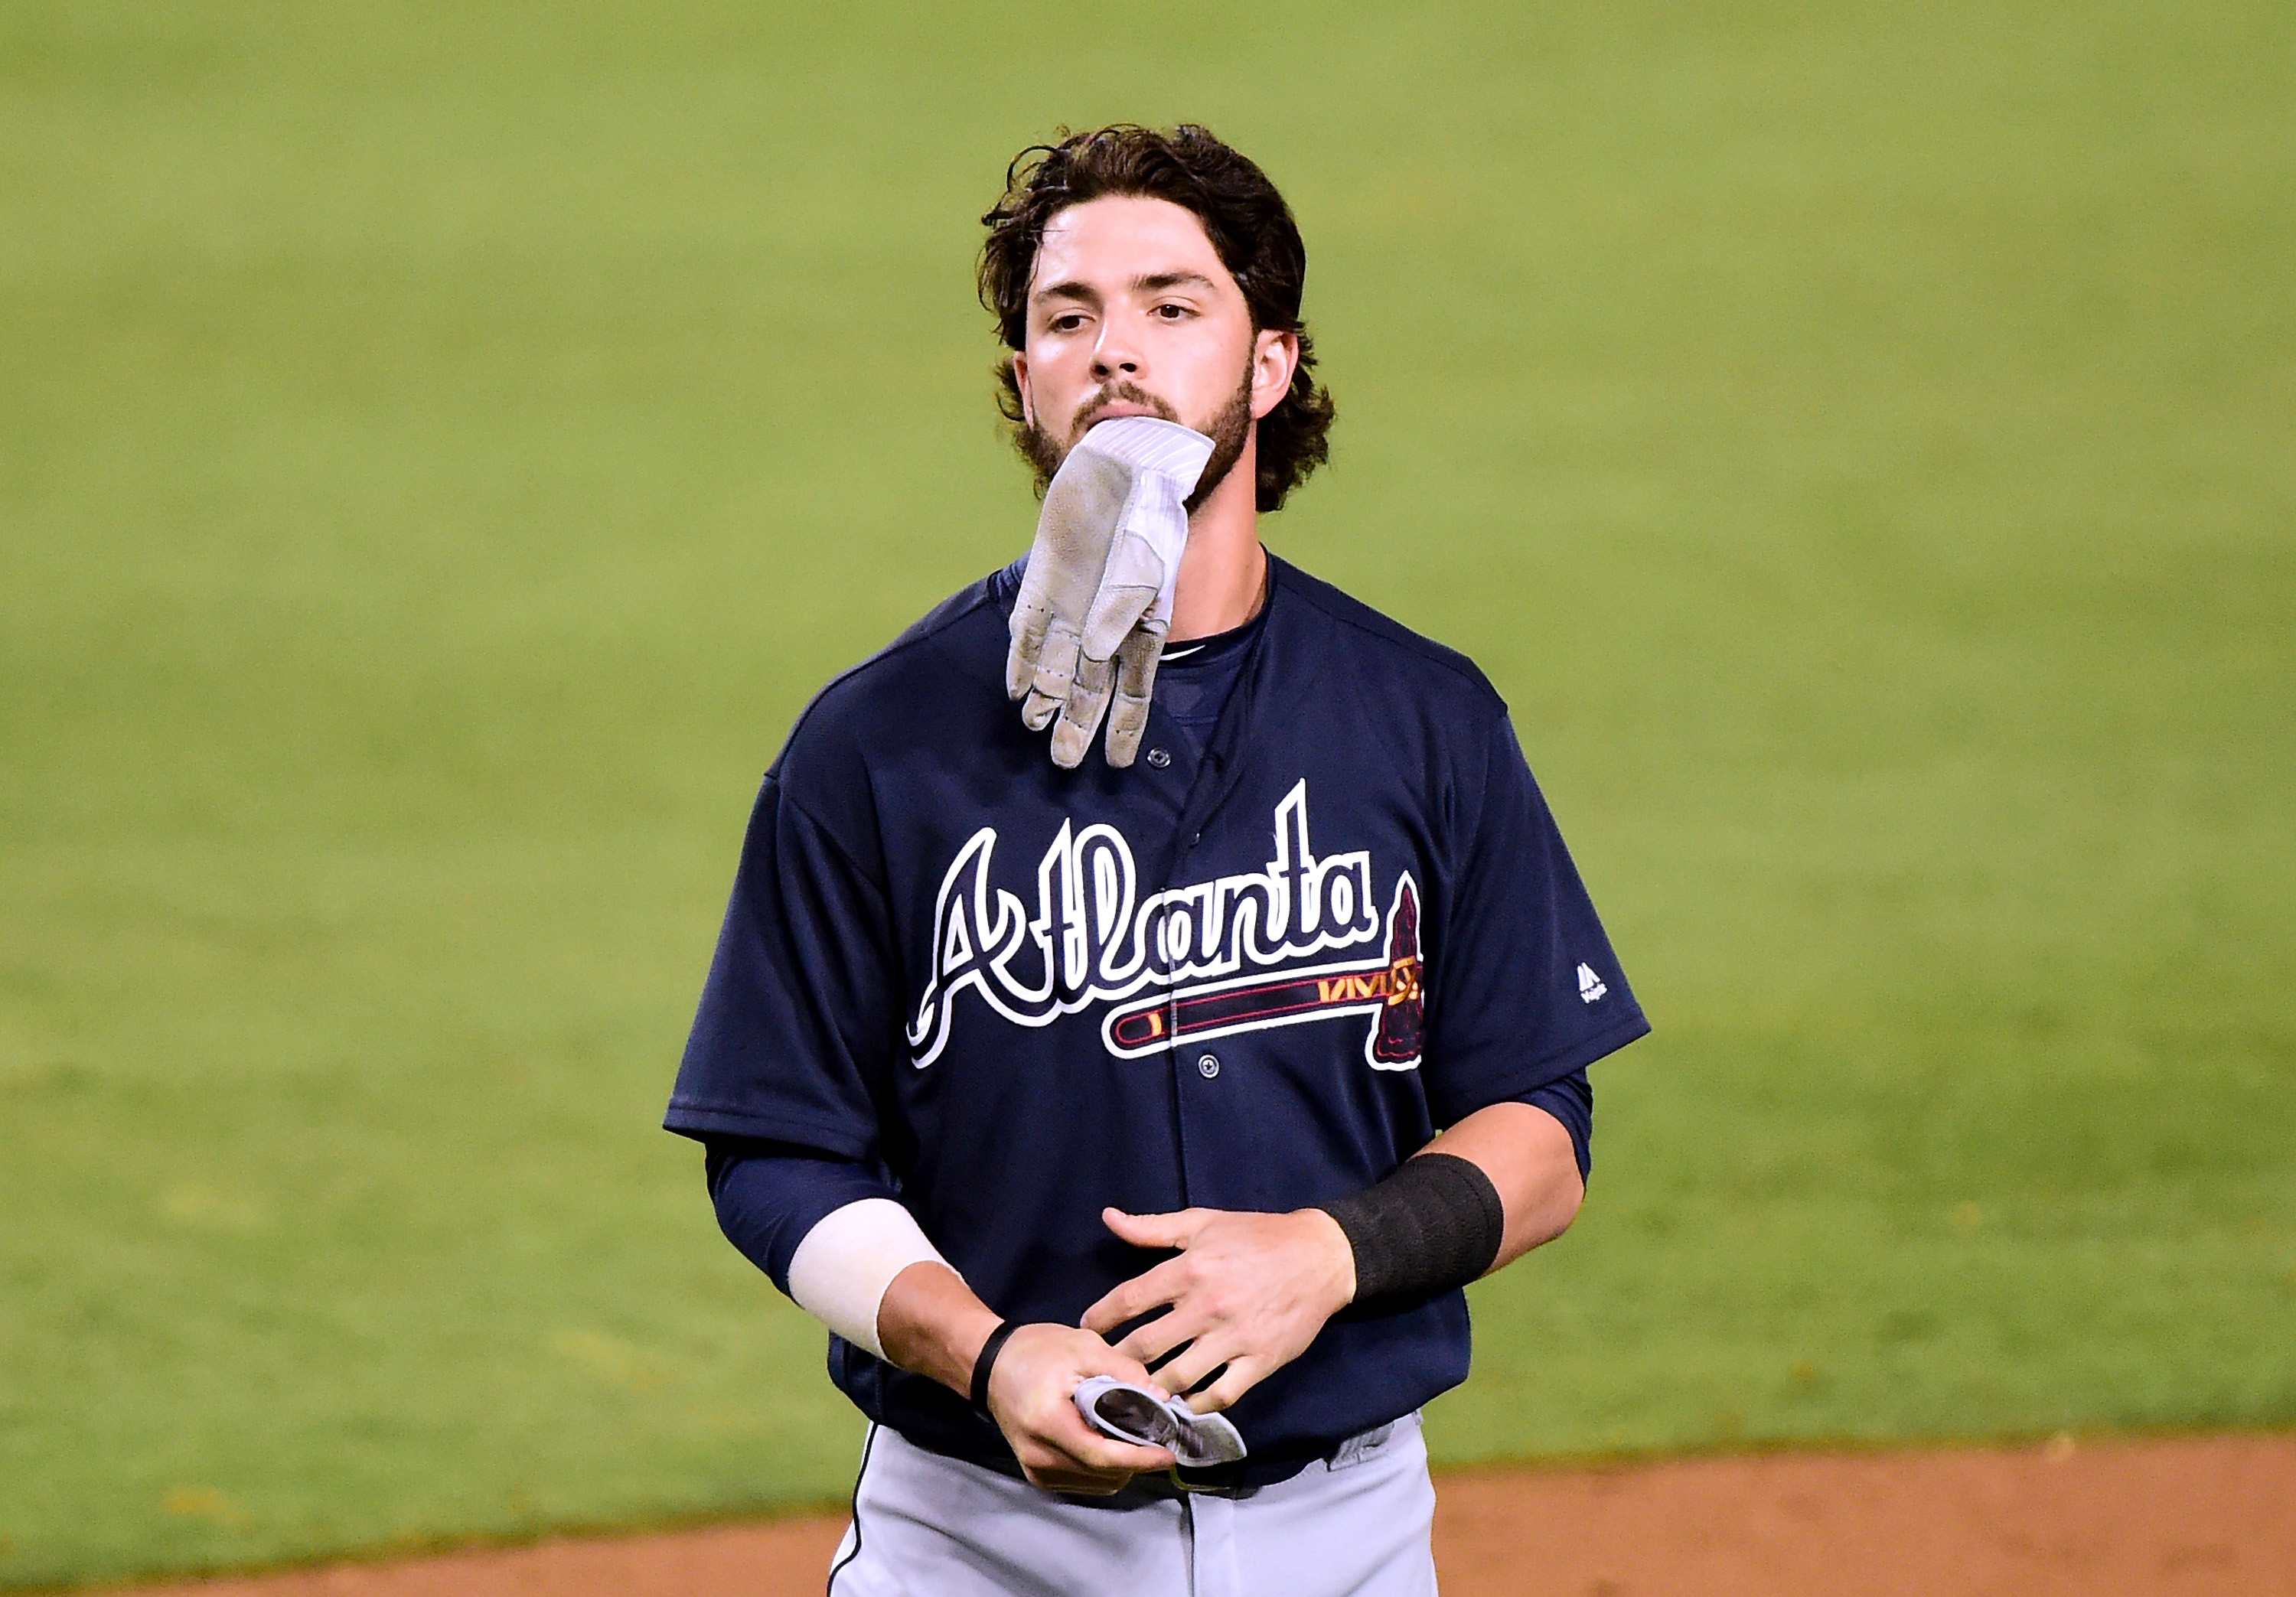 Atlanta Braves' Dansby Swanson starred in a national commercial as a 10  year old 